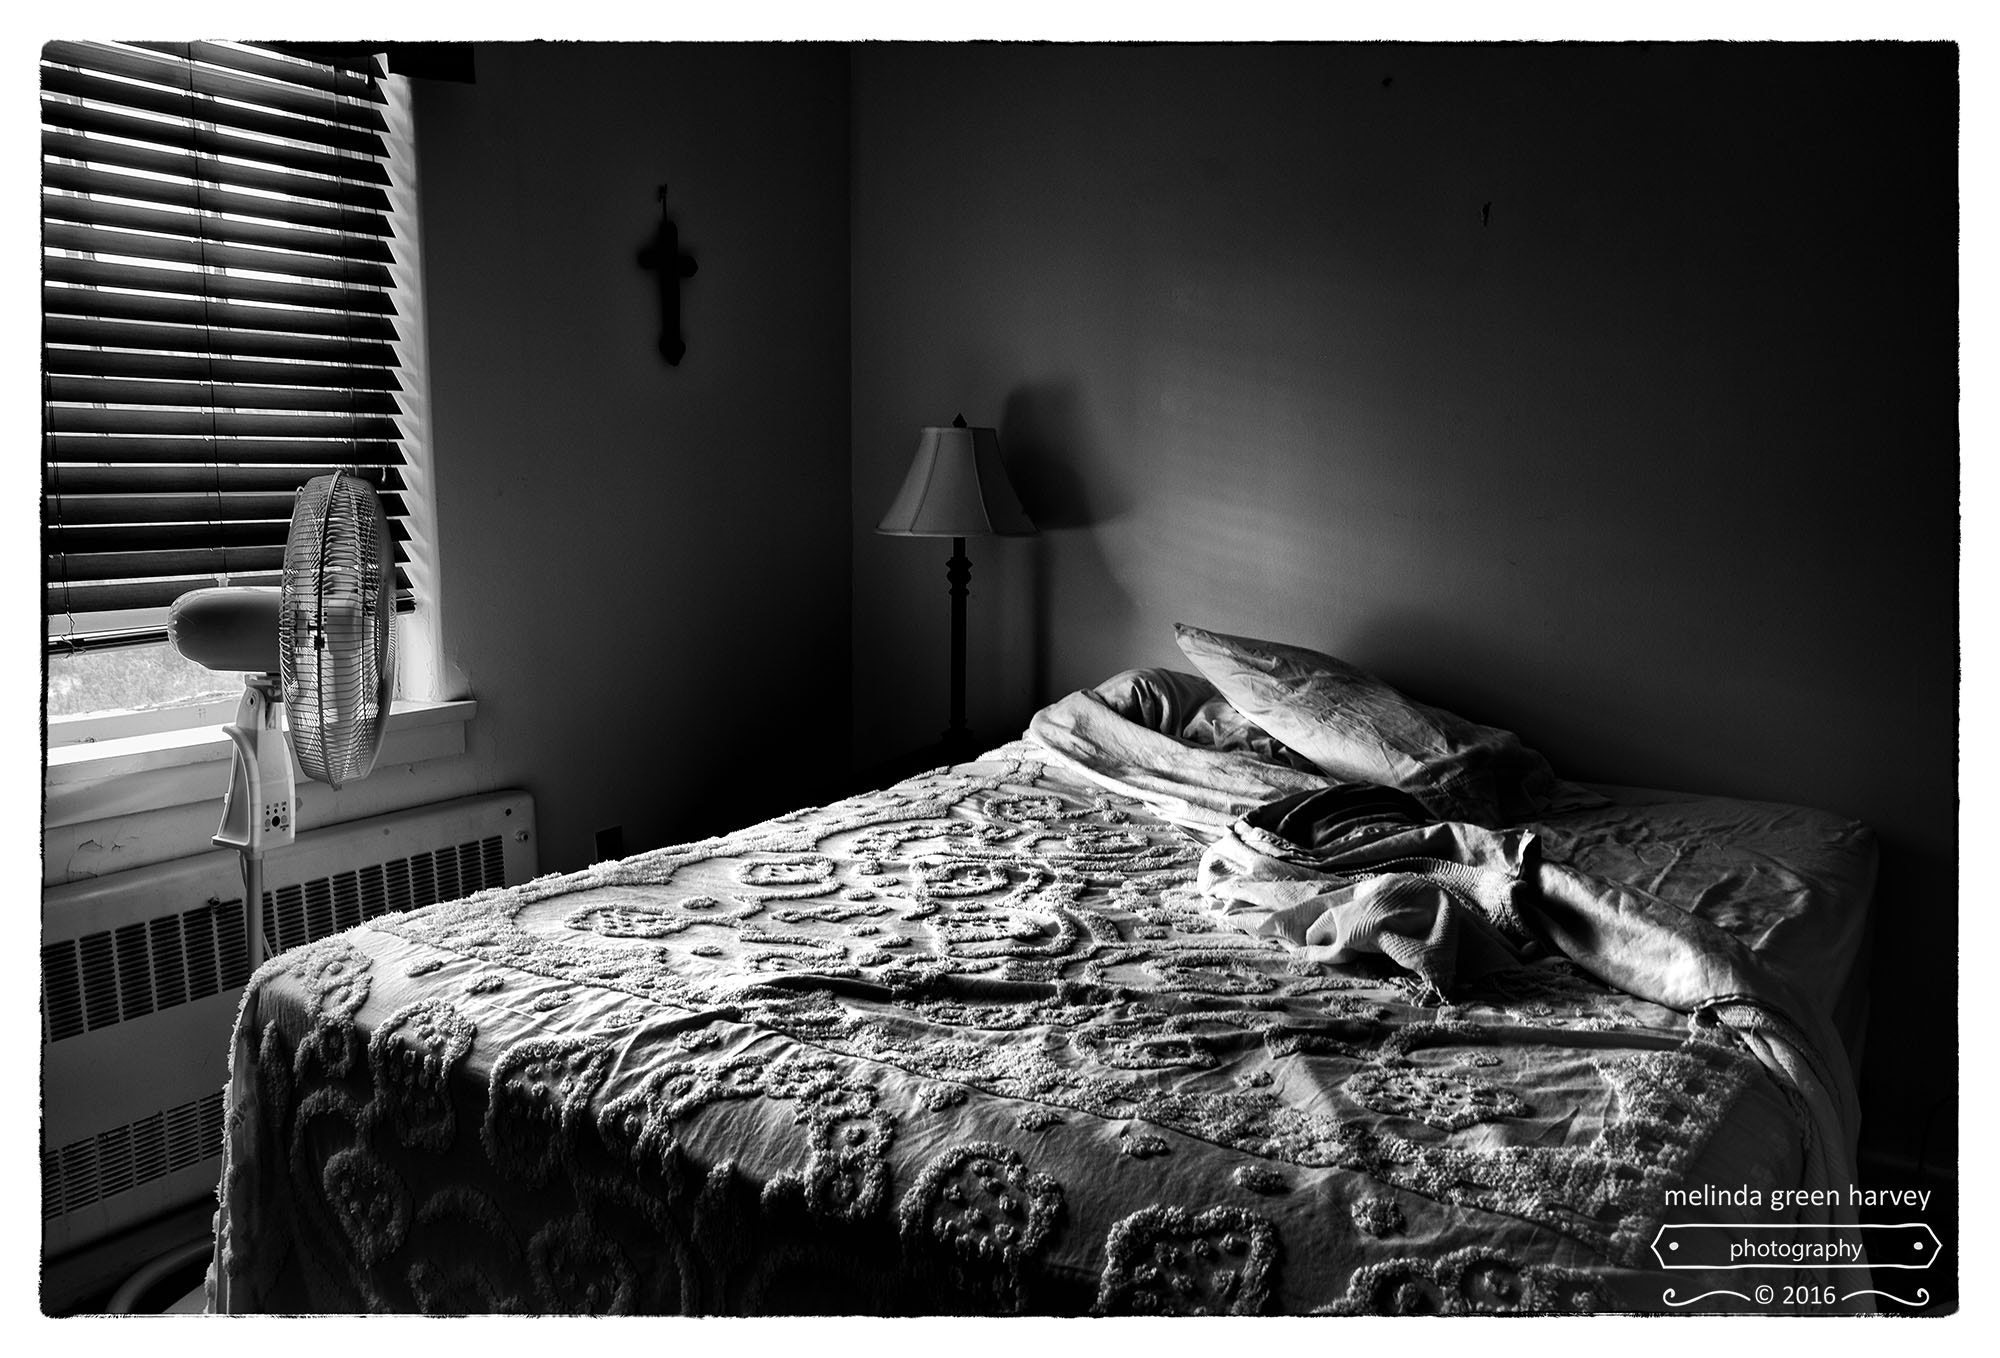 Summicron-M 1:2/28 ASPH. sample photo. In the room of sorrows photography